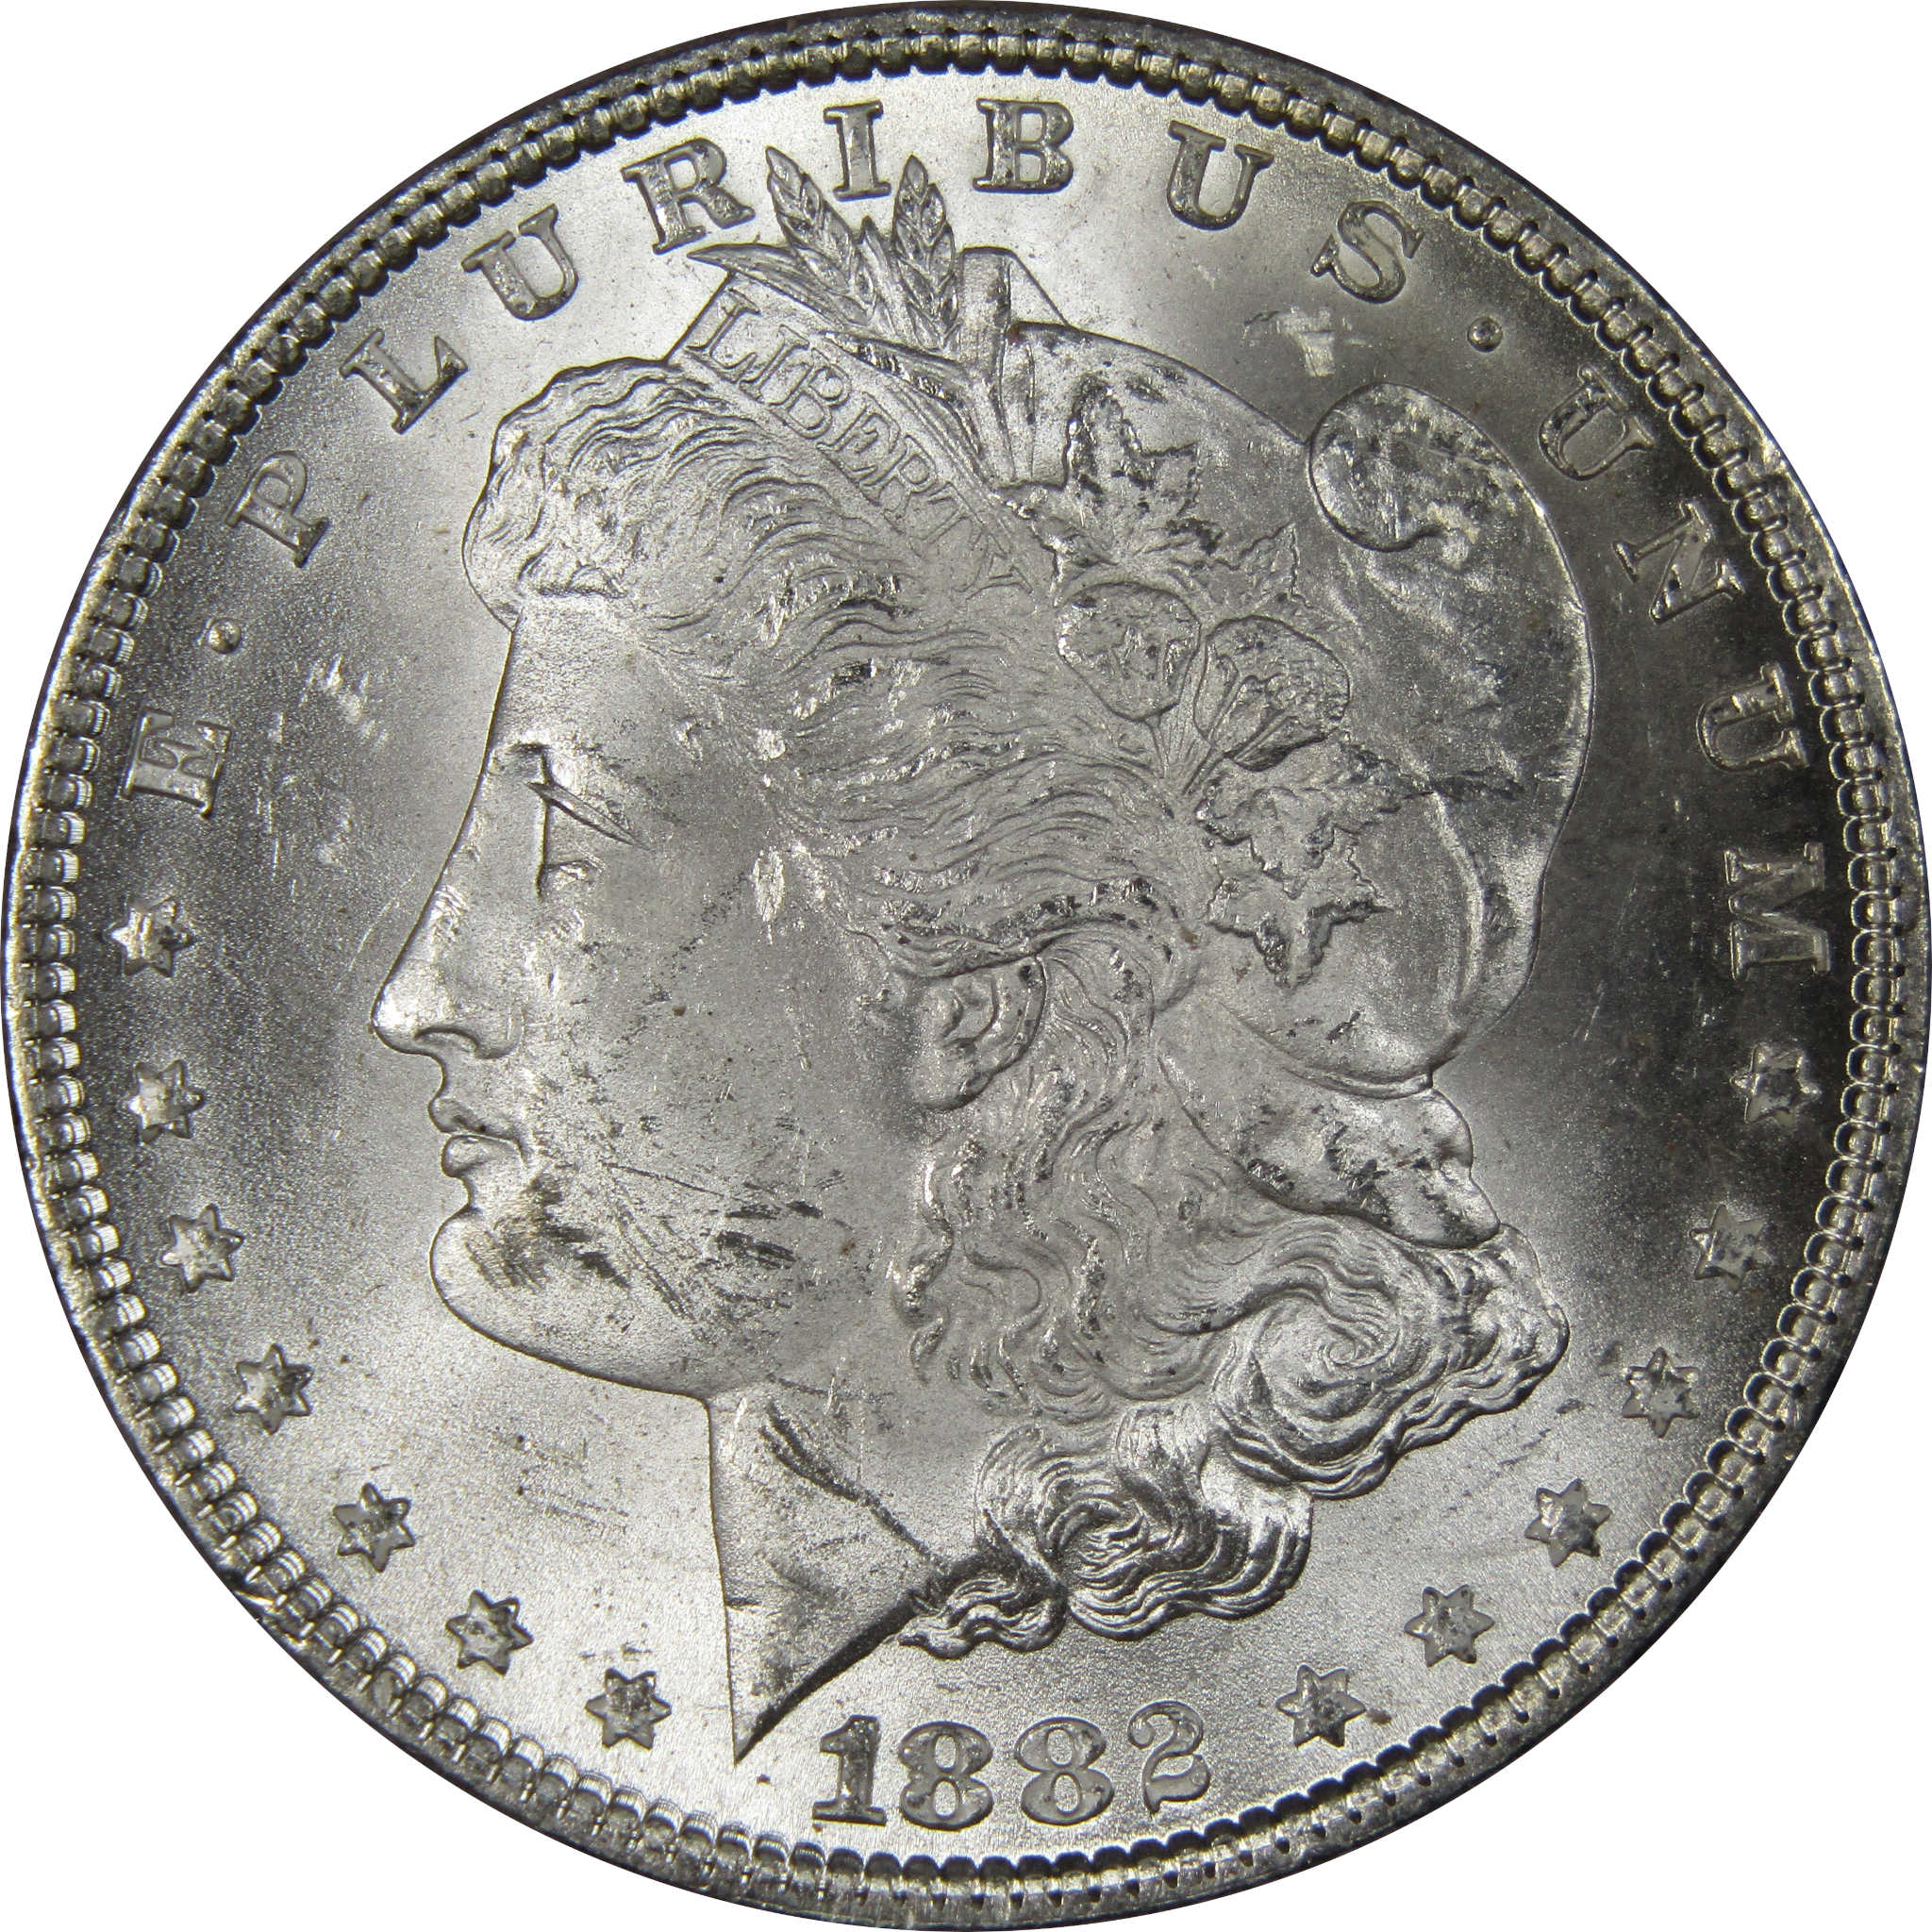 1882 Morgan Dollar BU Uncirculated Mint State 90% Silver SKU:IPC9717 - Morgan coin - Morgan silver dollar - Morgan silver dollar for sale - Profile Coins &amp; Collectibles